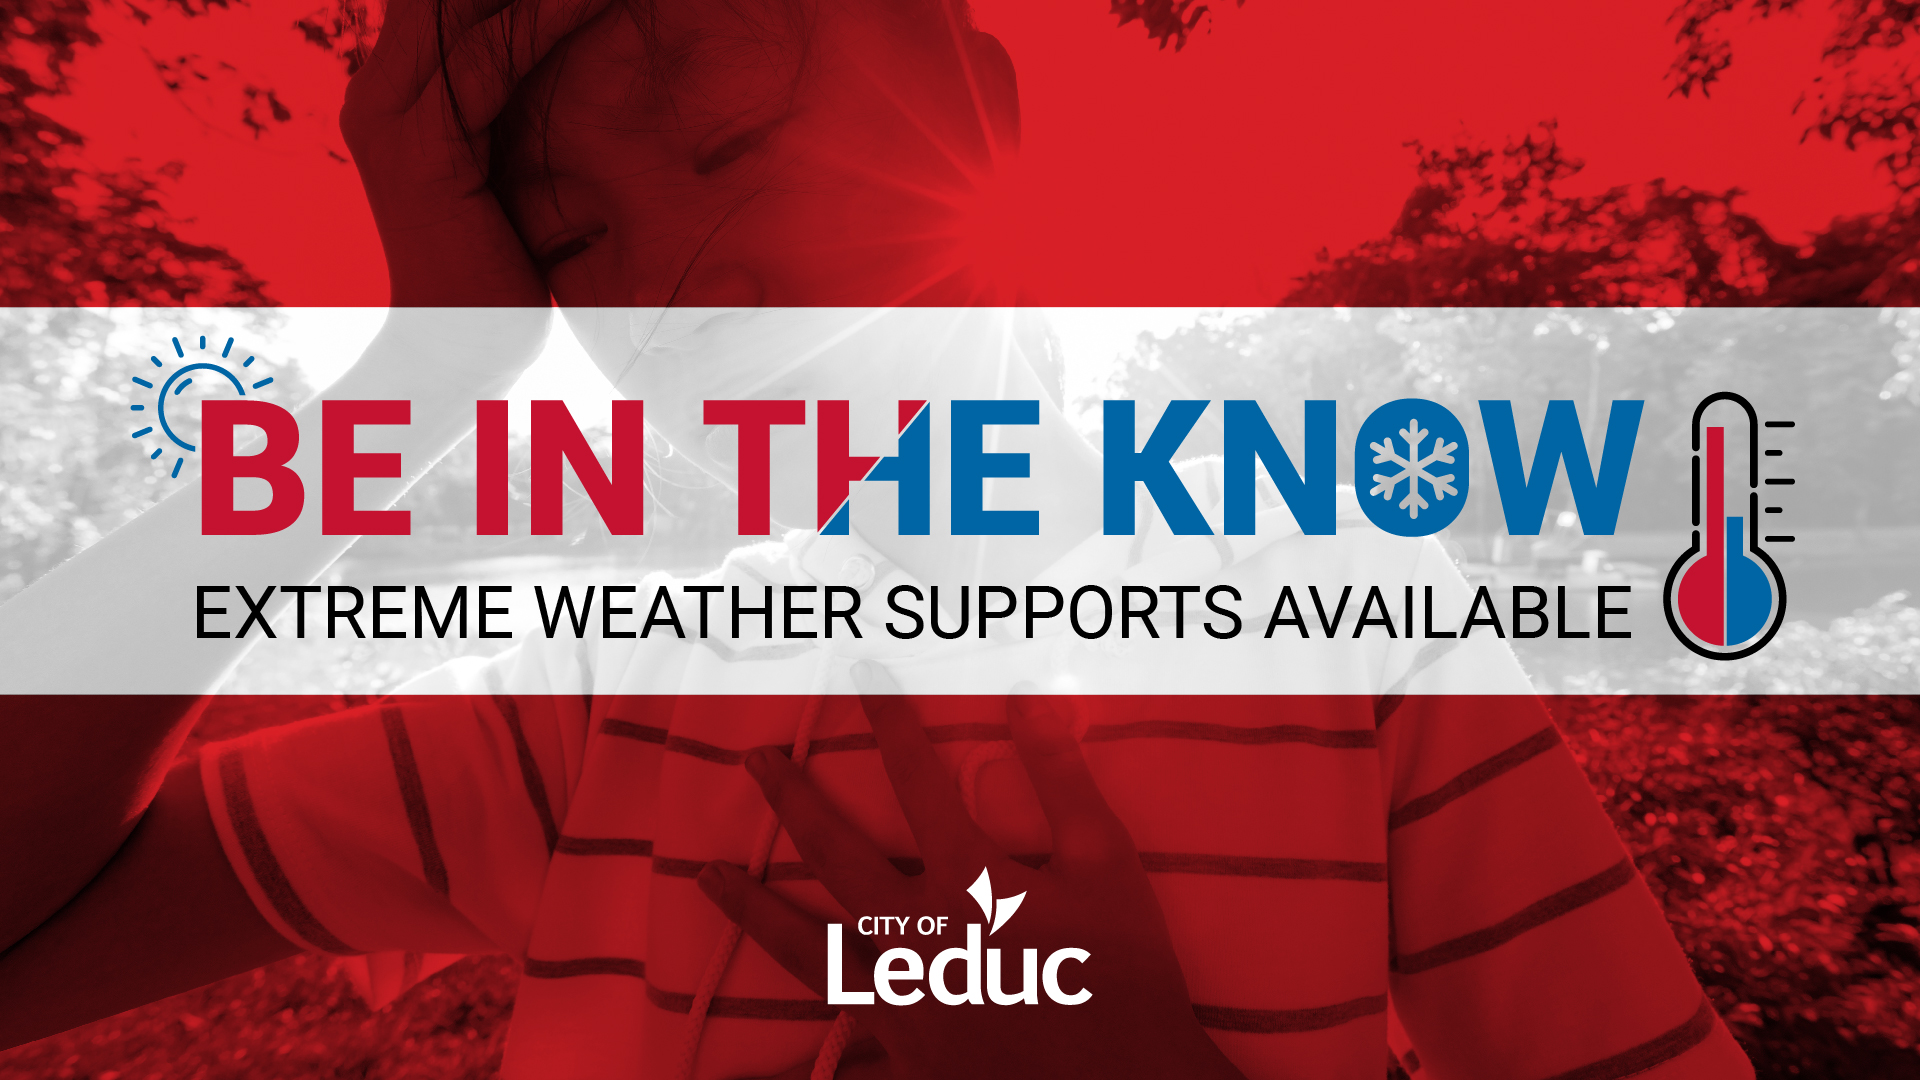 Be in the Know, Extreme weather supports available